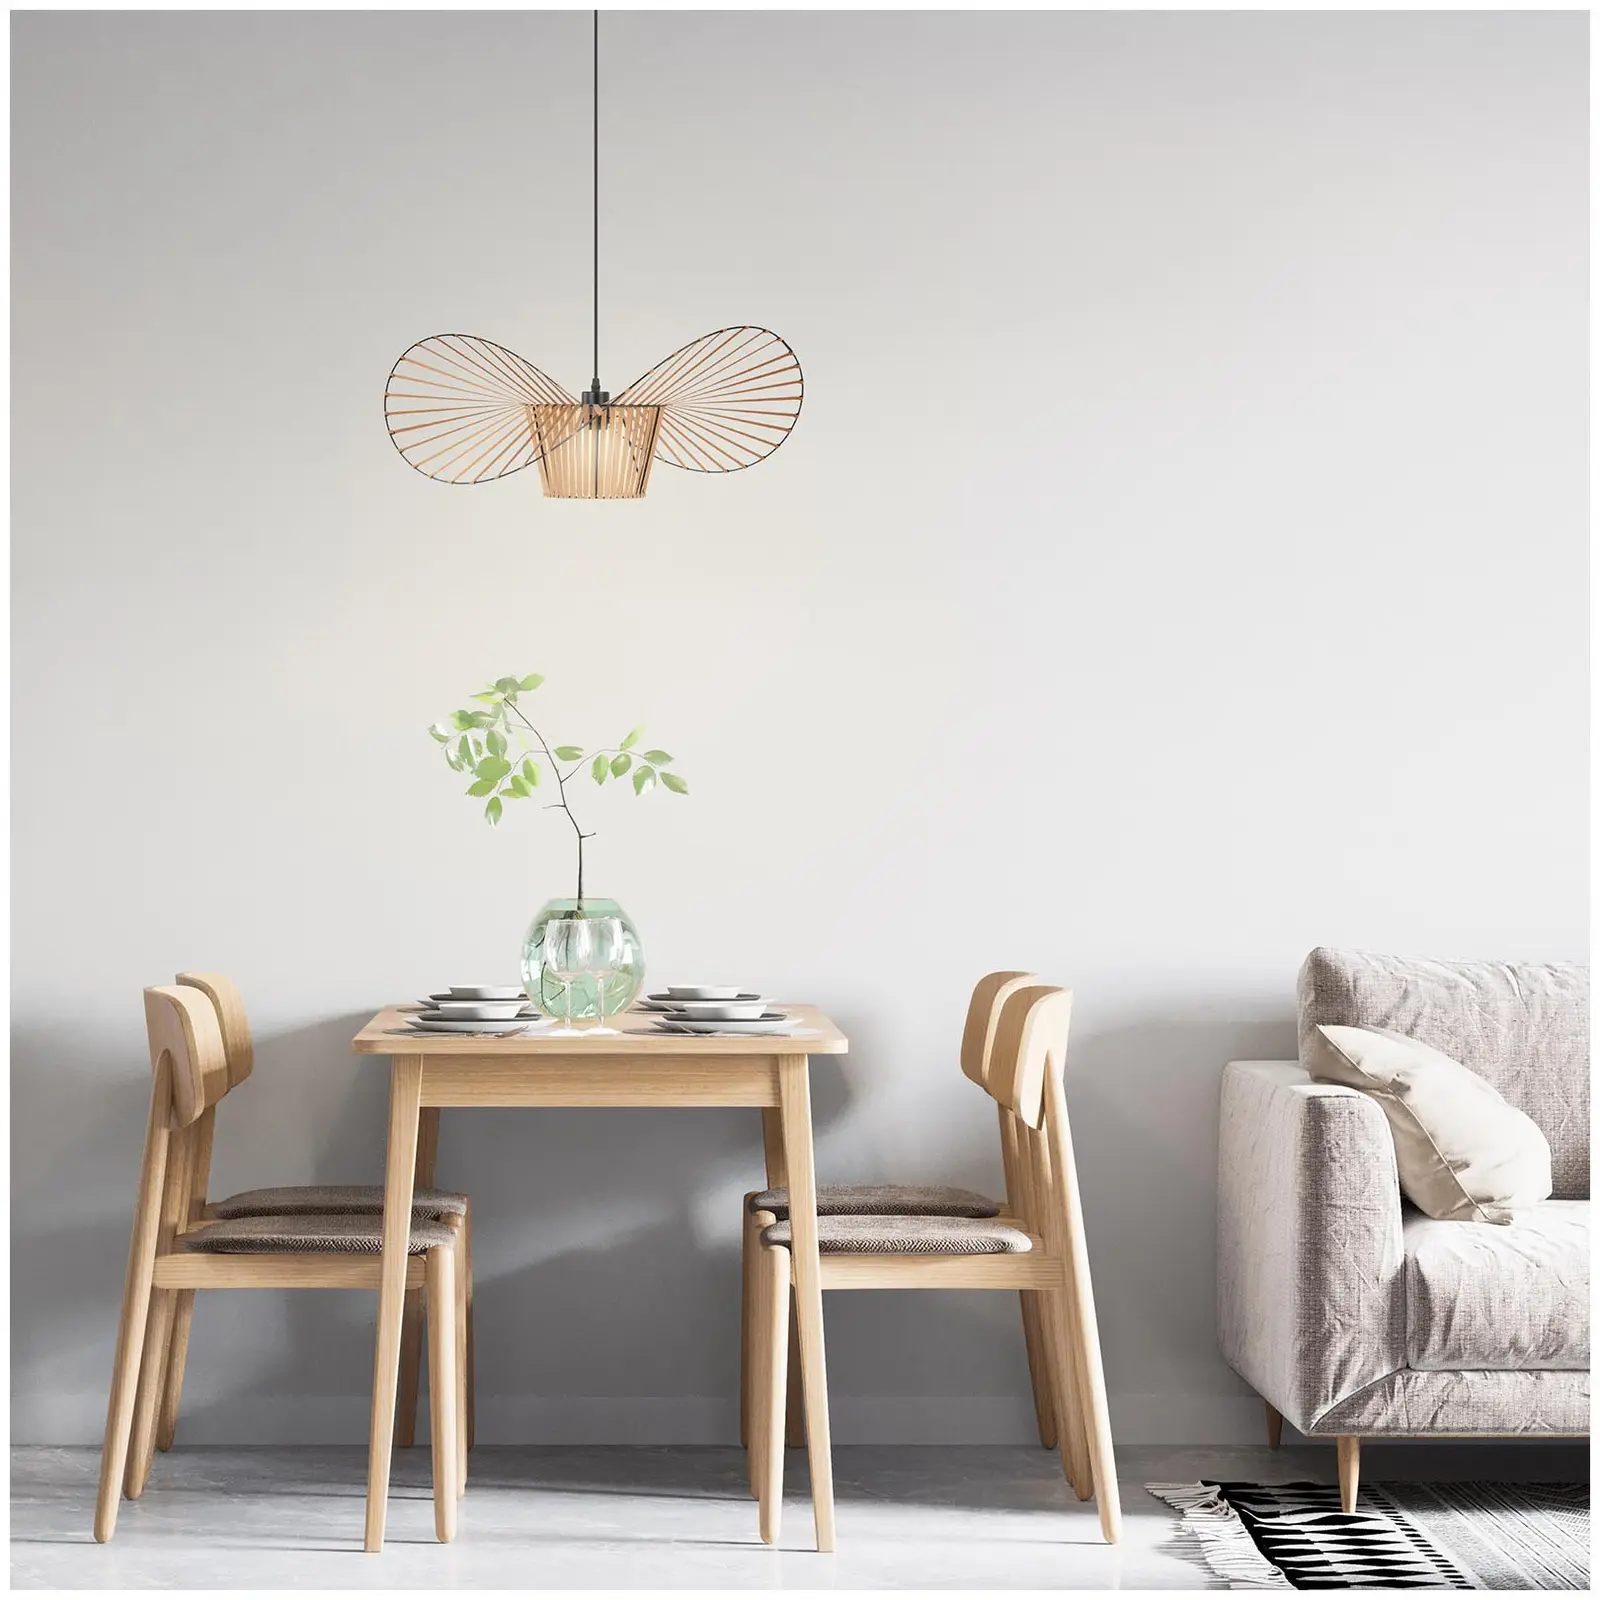 Pendant Light - 1 light source up to 40 W - large shade